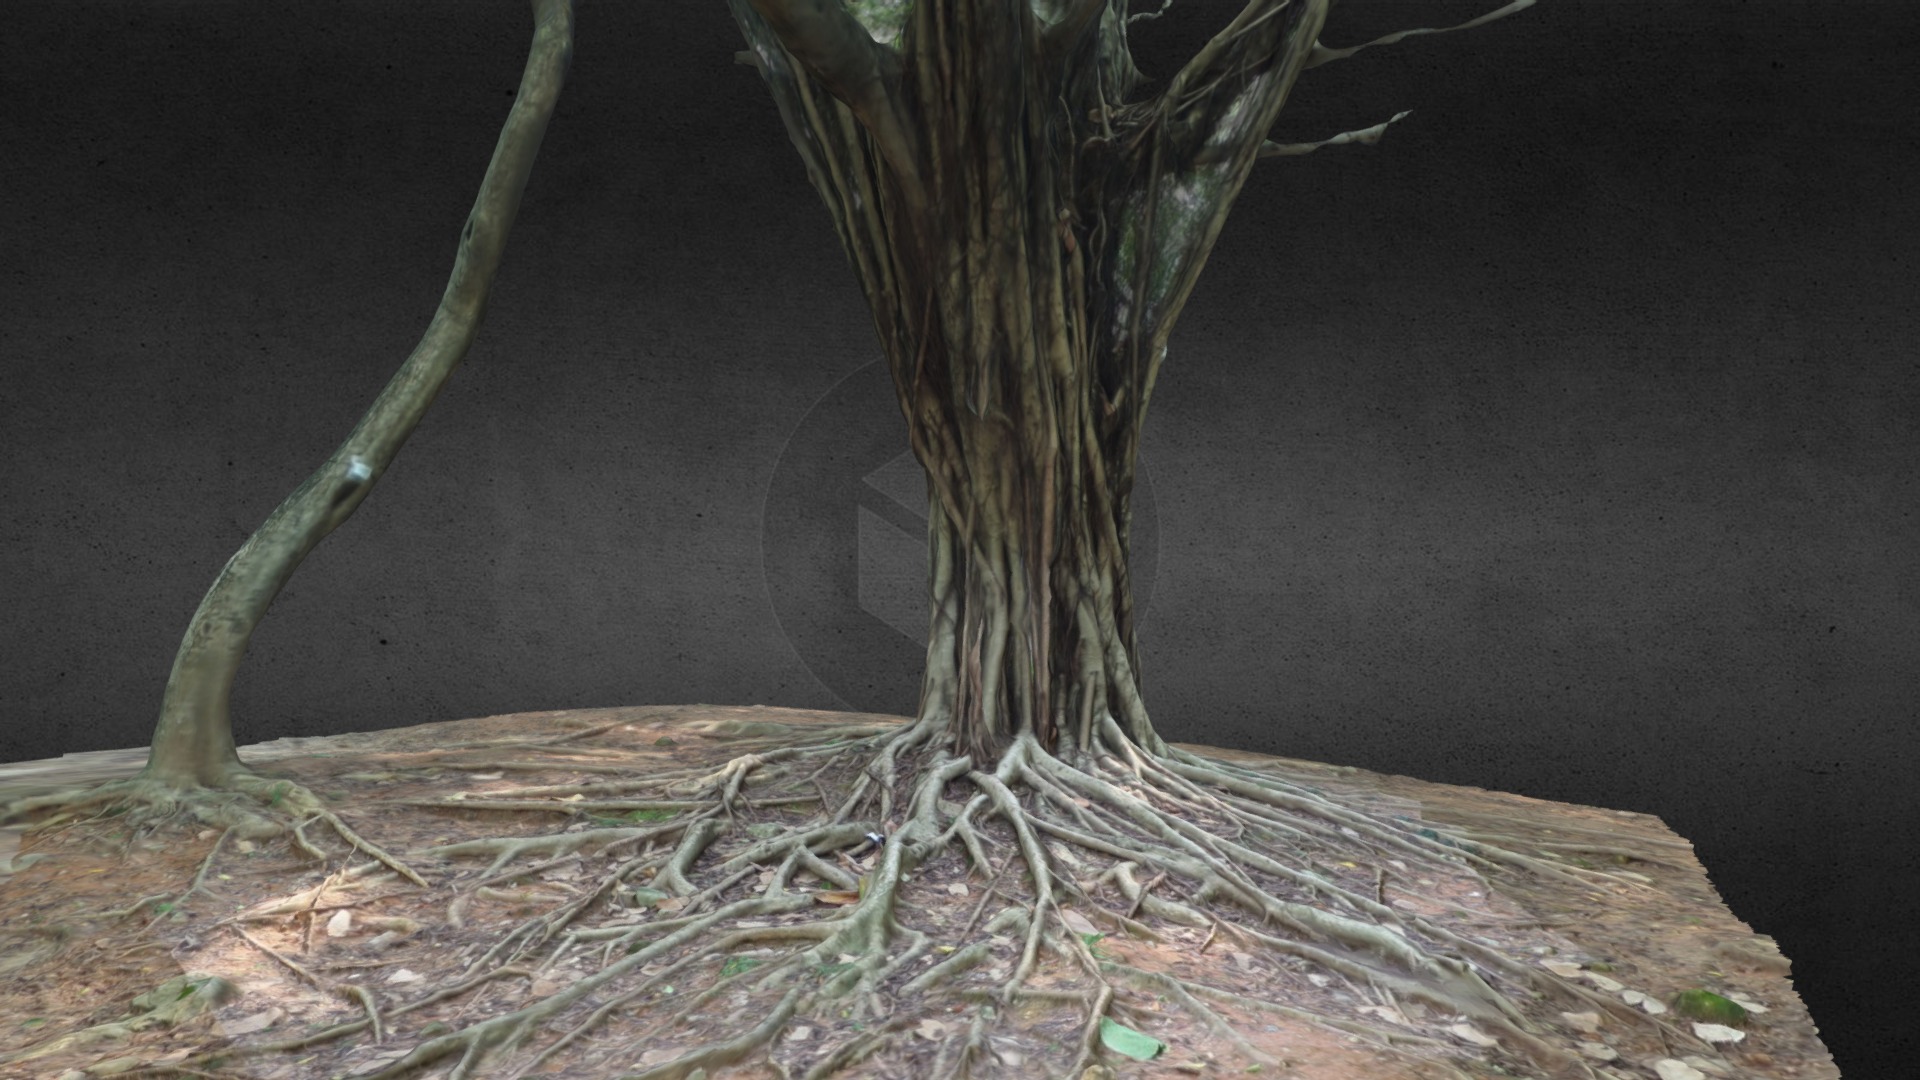 3D model T1427 - This is a 3D model of the T1427. The 3D model is about a tree with branches and roots.